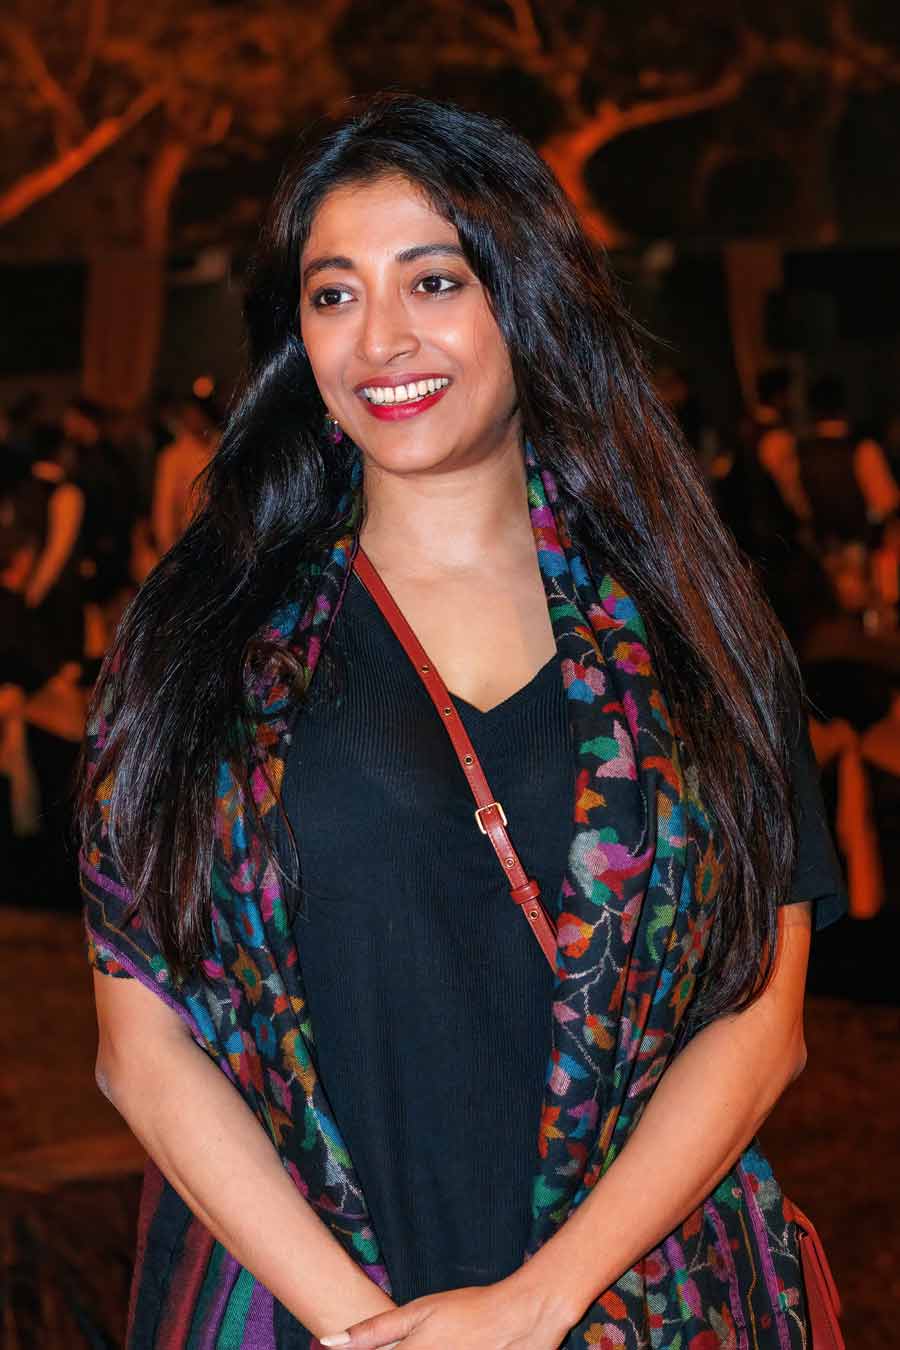 “I am in Kolkata, the city of joy, to celebrate NYE after a long time… lovely people, music and food here at RCGC,” said actress Paoli Dam, looking simple and stylish in black  